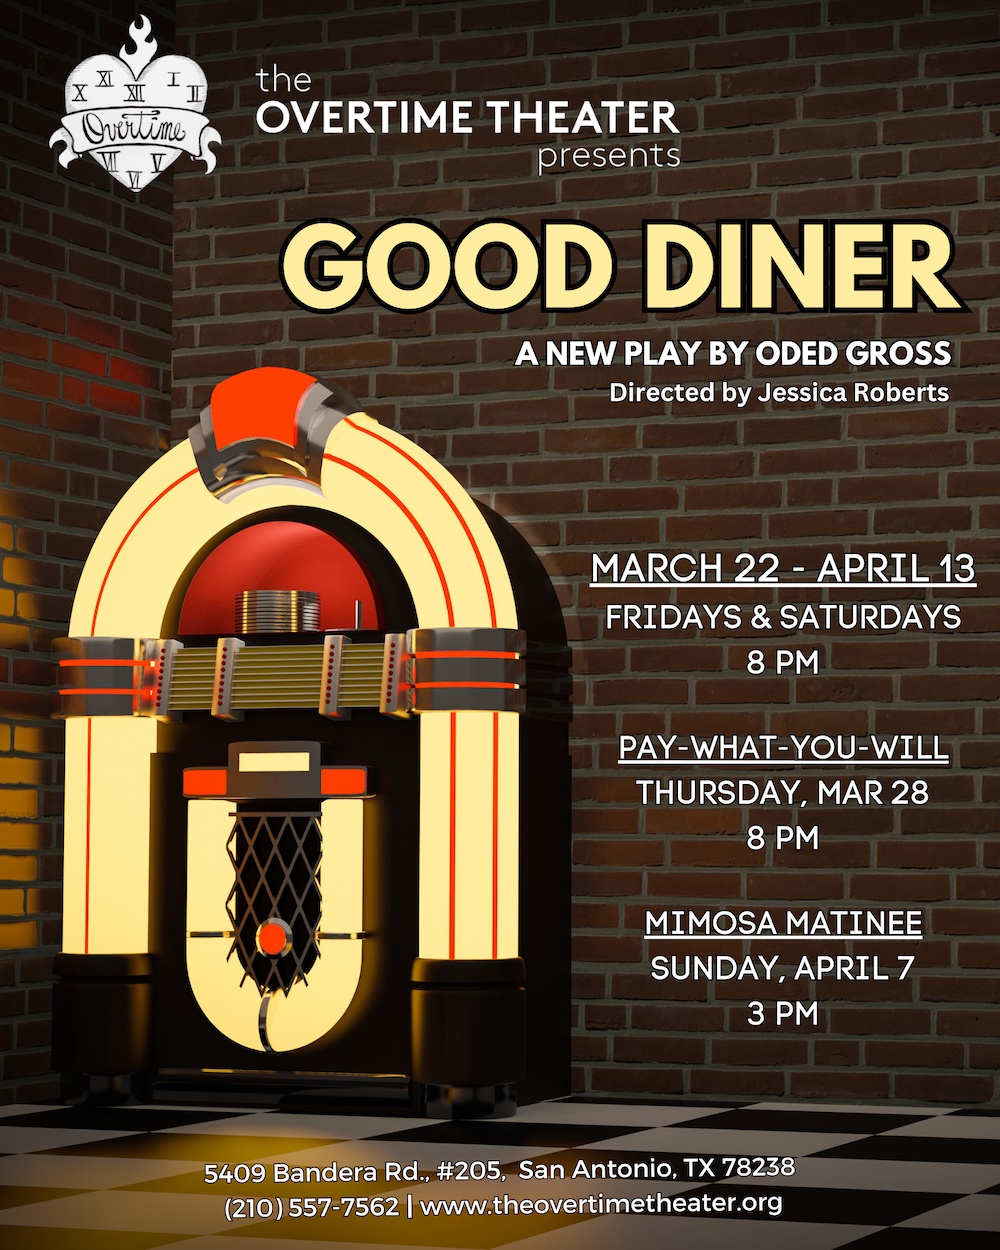 Good Diner by Overtime Theater